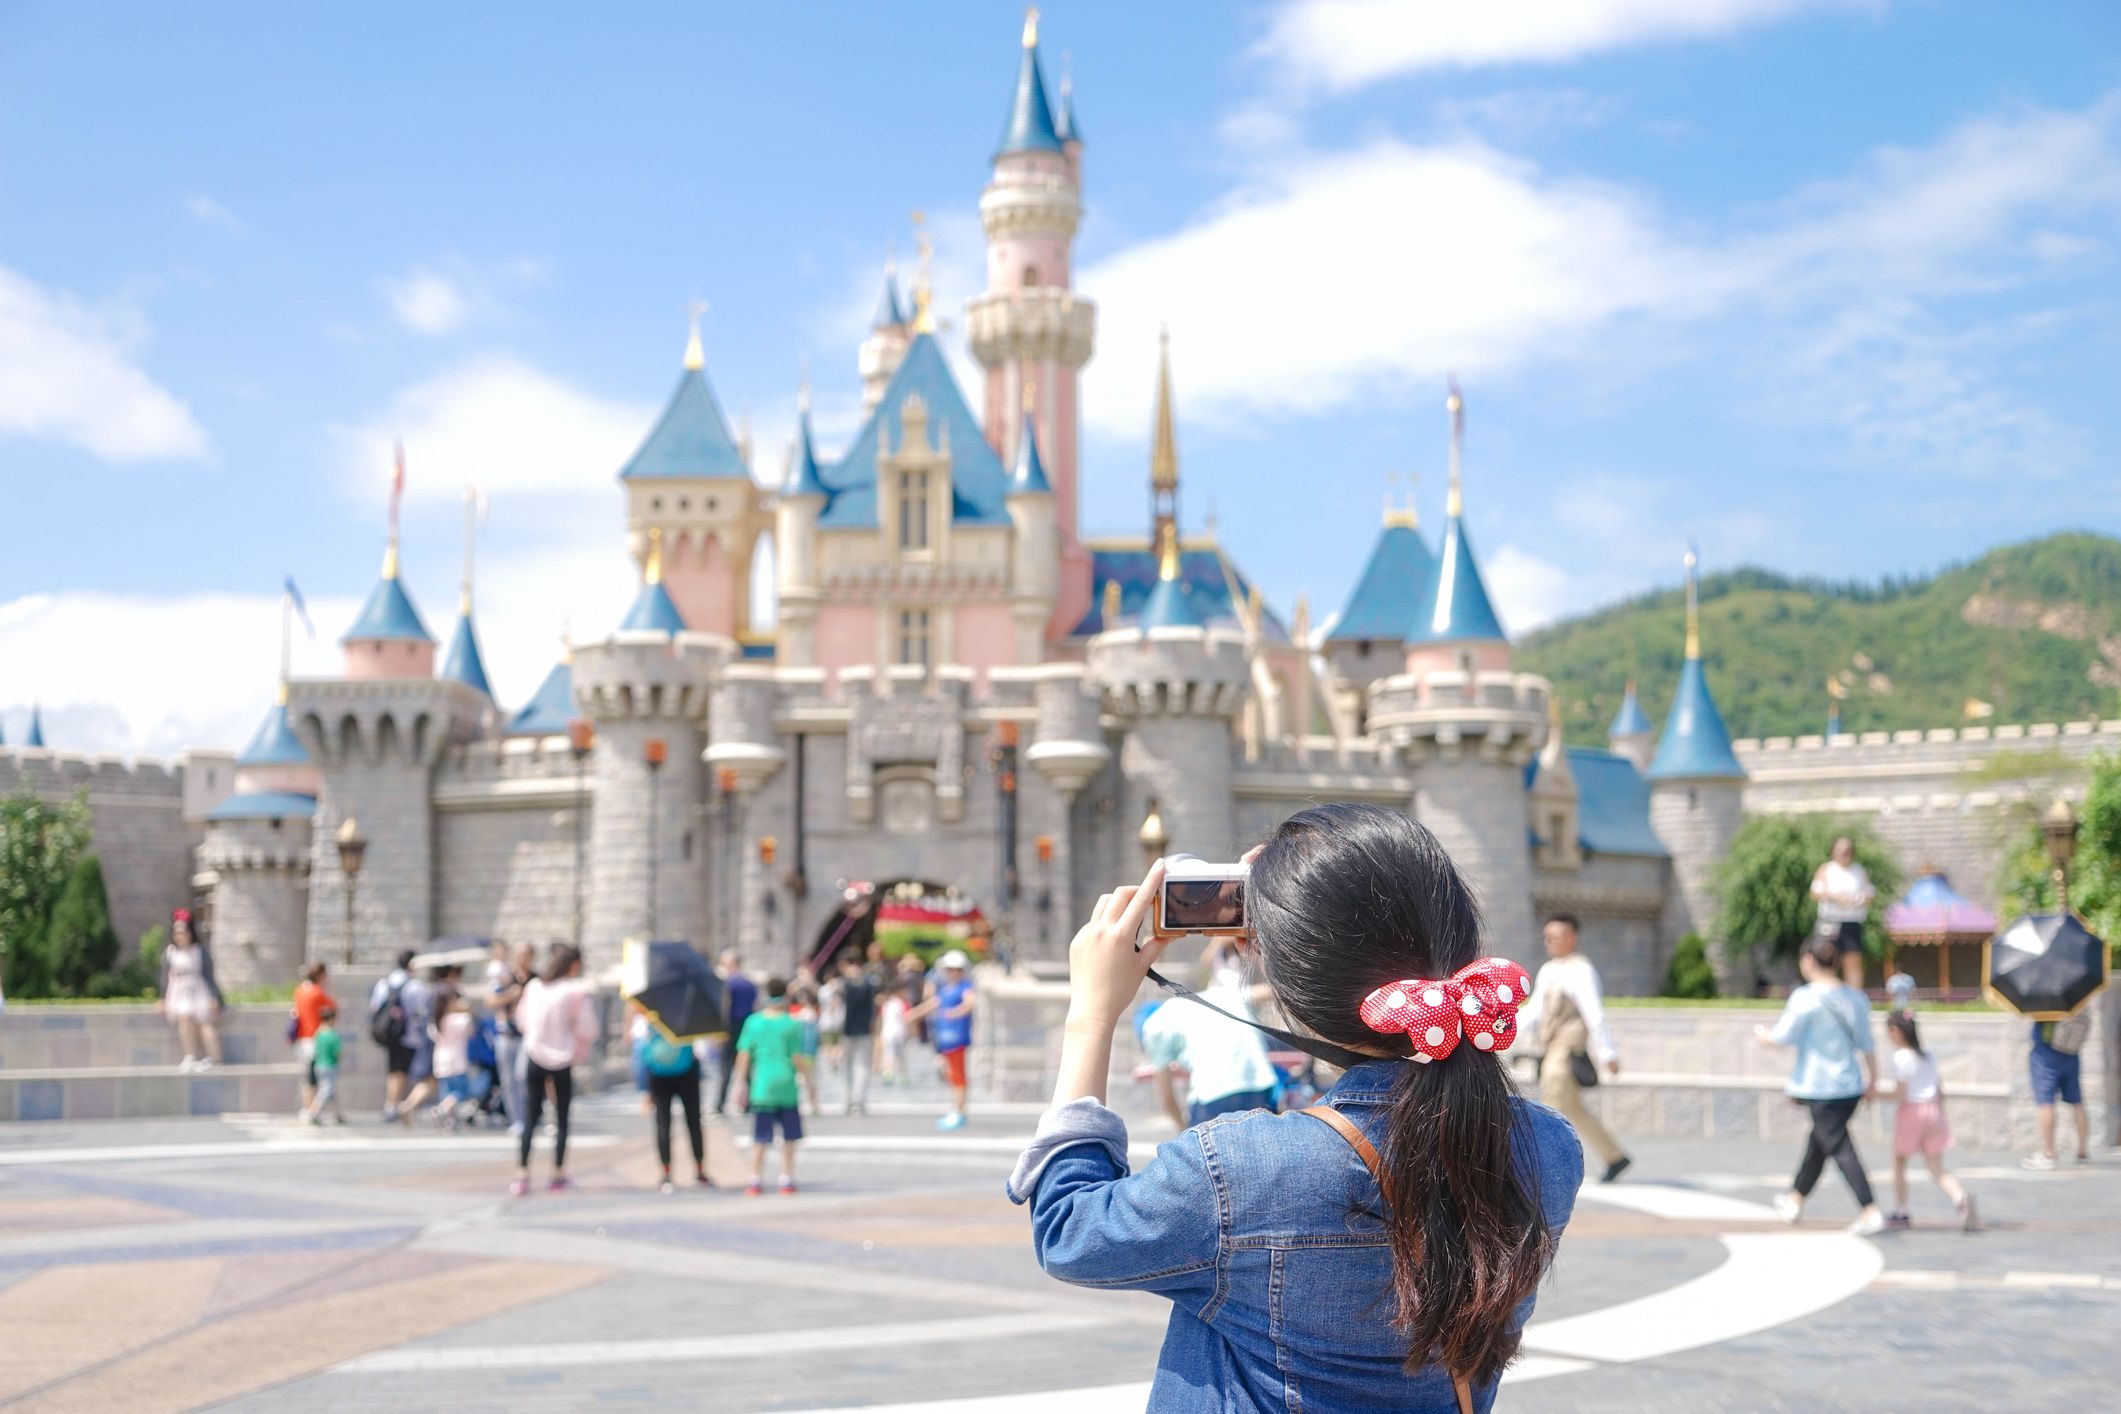 A girl with dark hair and a red polka dotted bow takes a photo of the castle in Disney's Magic Kingdom